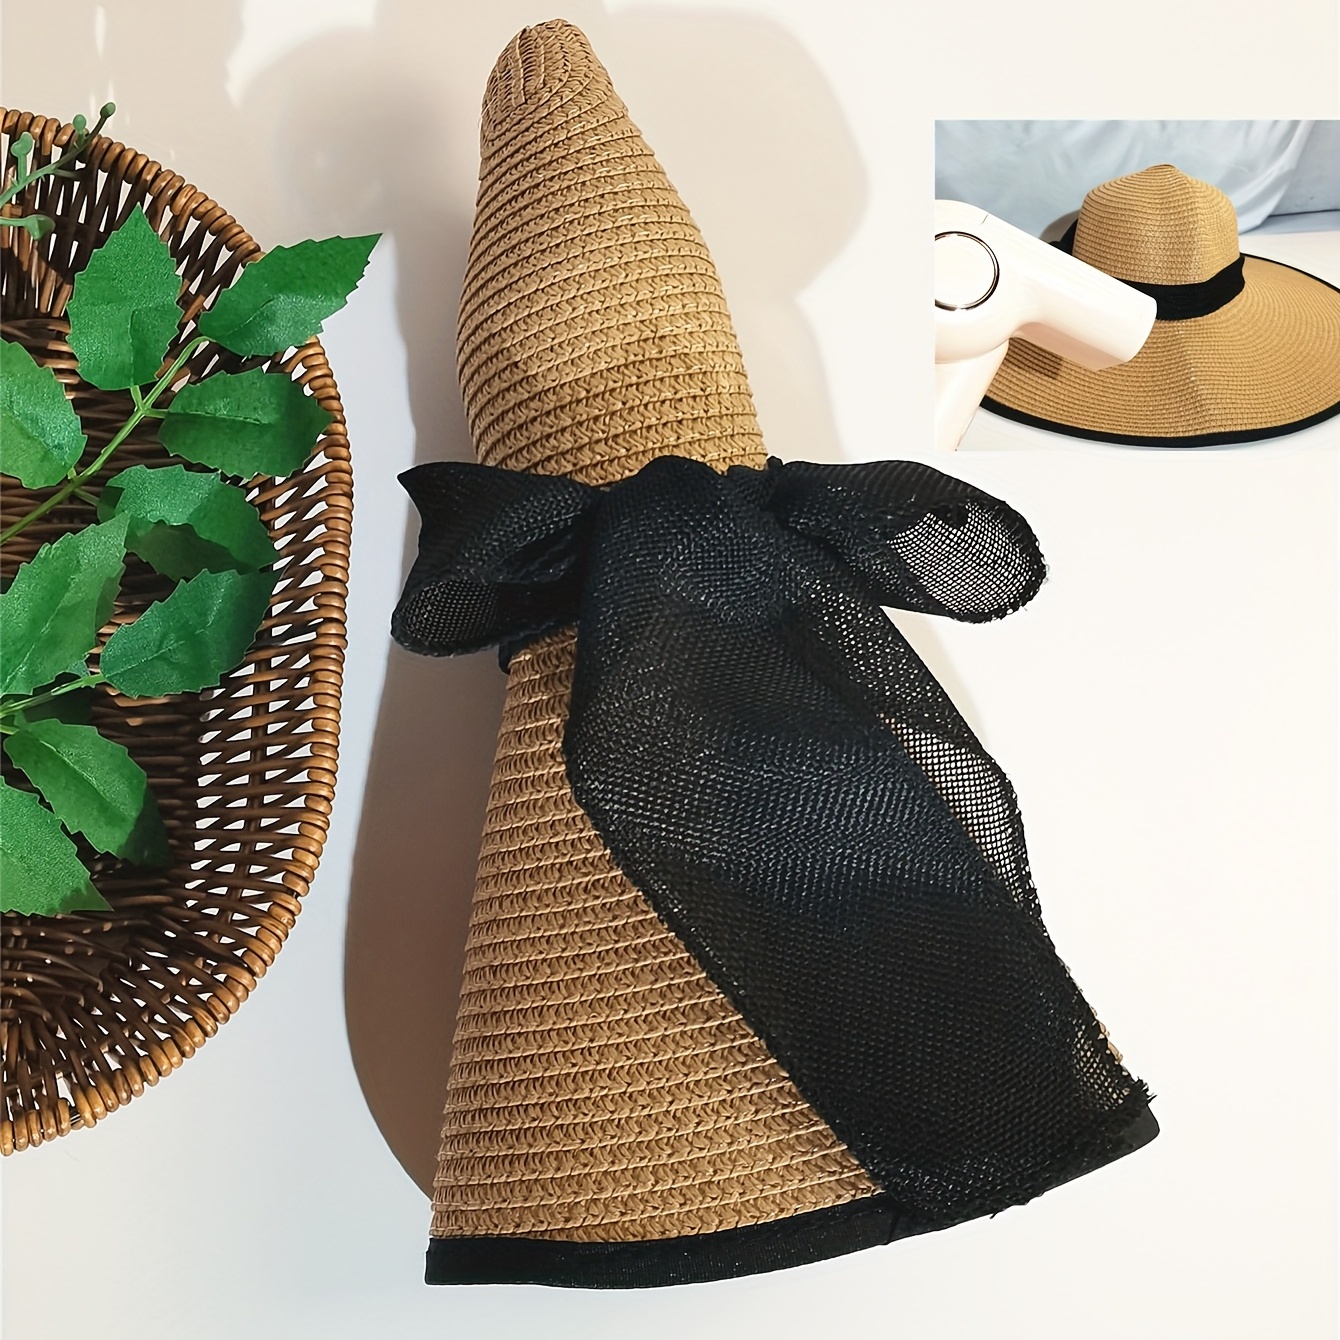 Elegant Straw Sun Hats For Women: Wide Floppy, Large & Elegant Perfect For  Beach, Pool & Outdoor Activities From Ewjv, $8.49